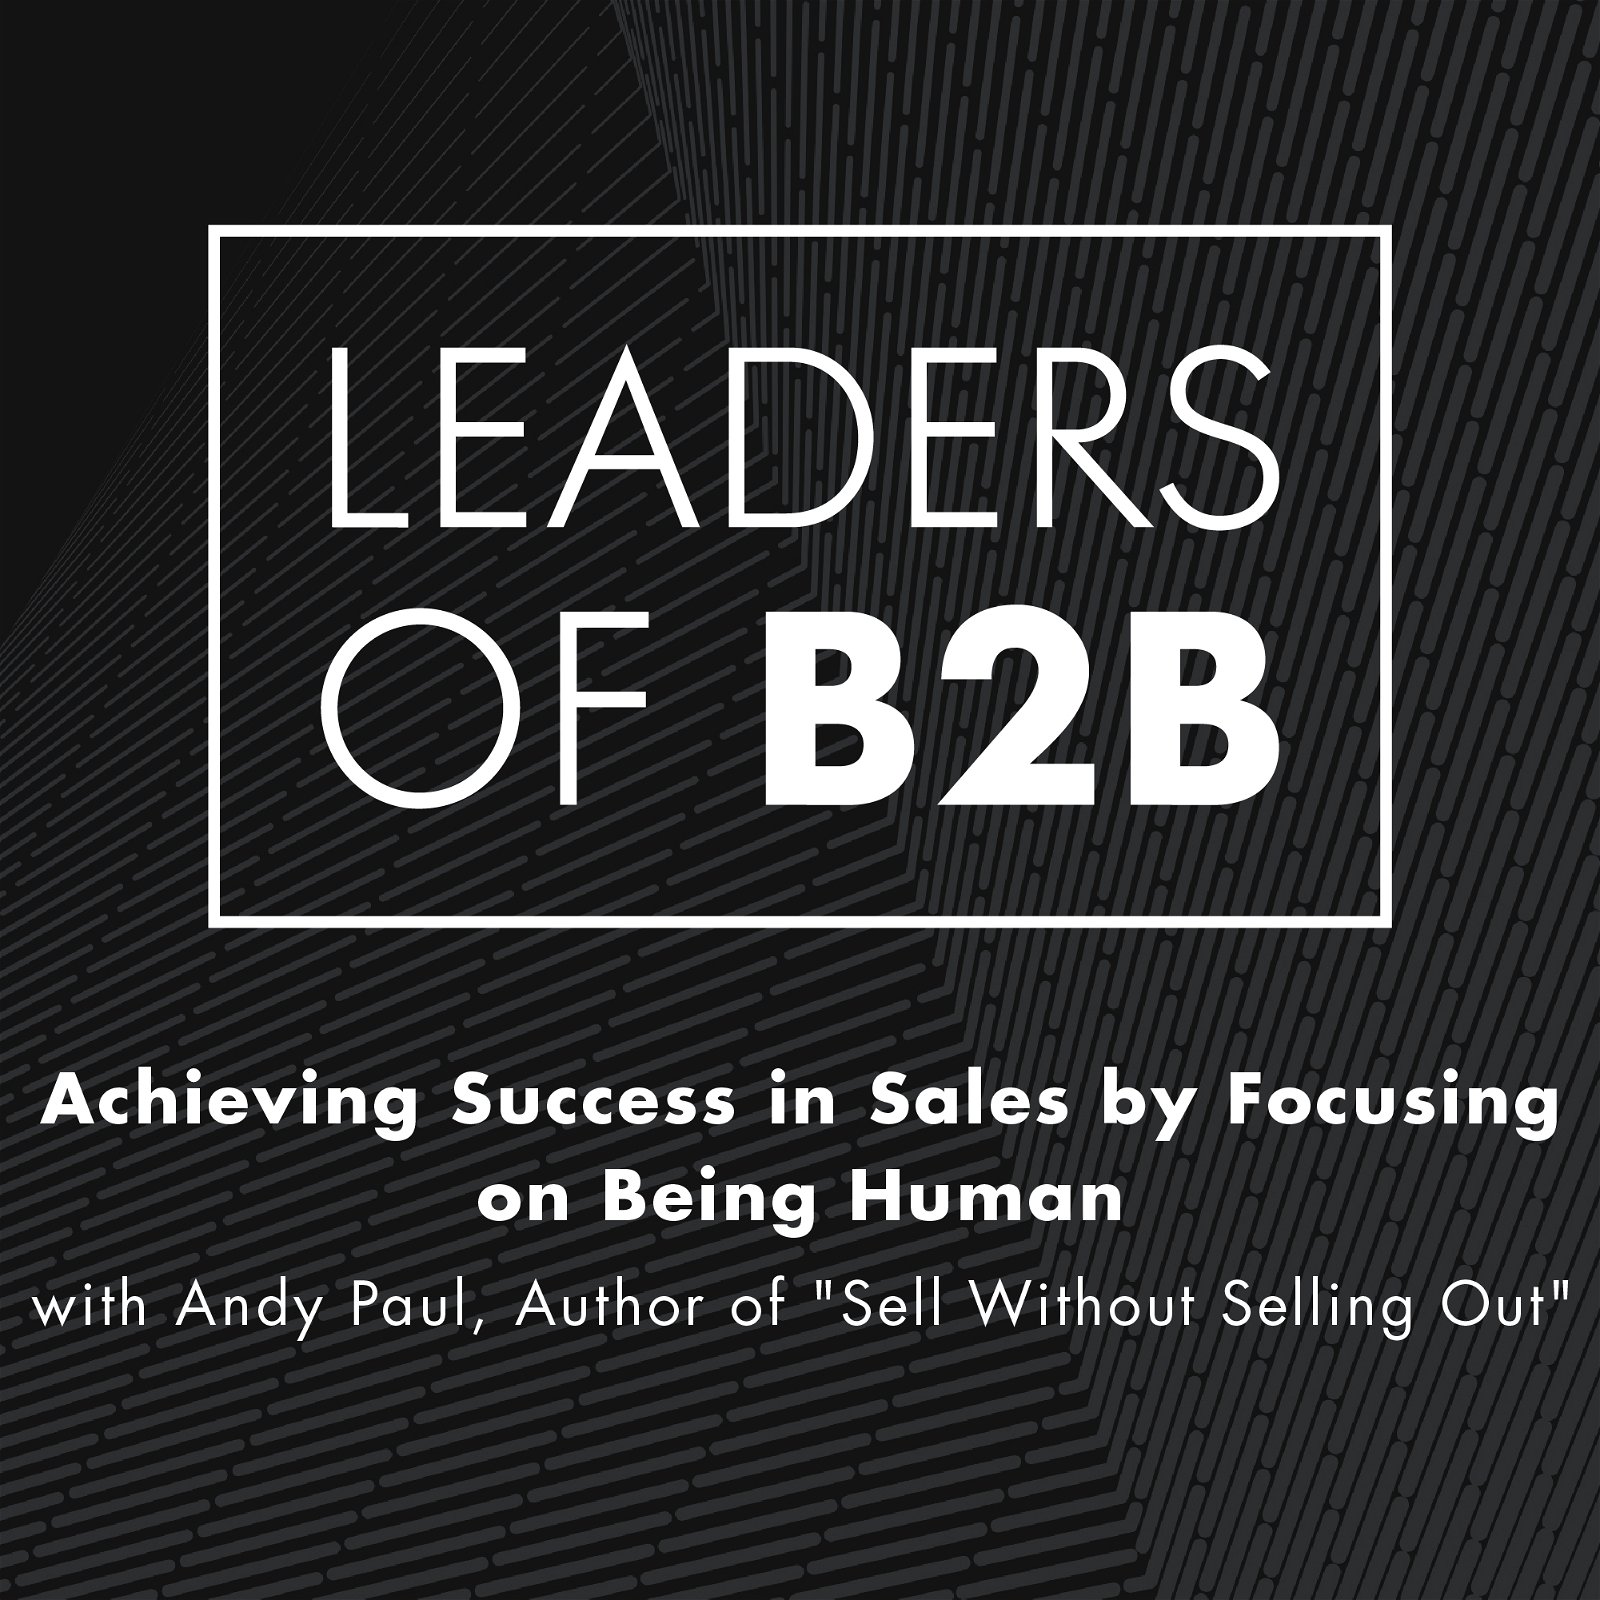 Achieving Success in Sales by Focusing on Being Human with Andy Paul, Author of “Sell Without Selling Out”